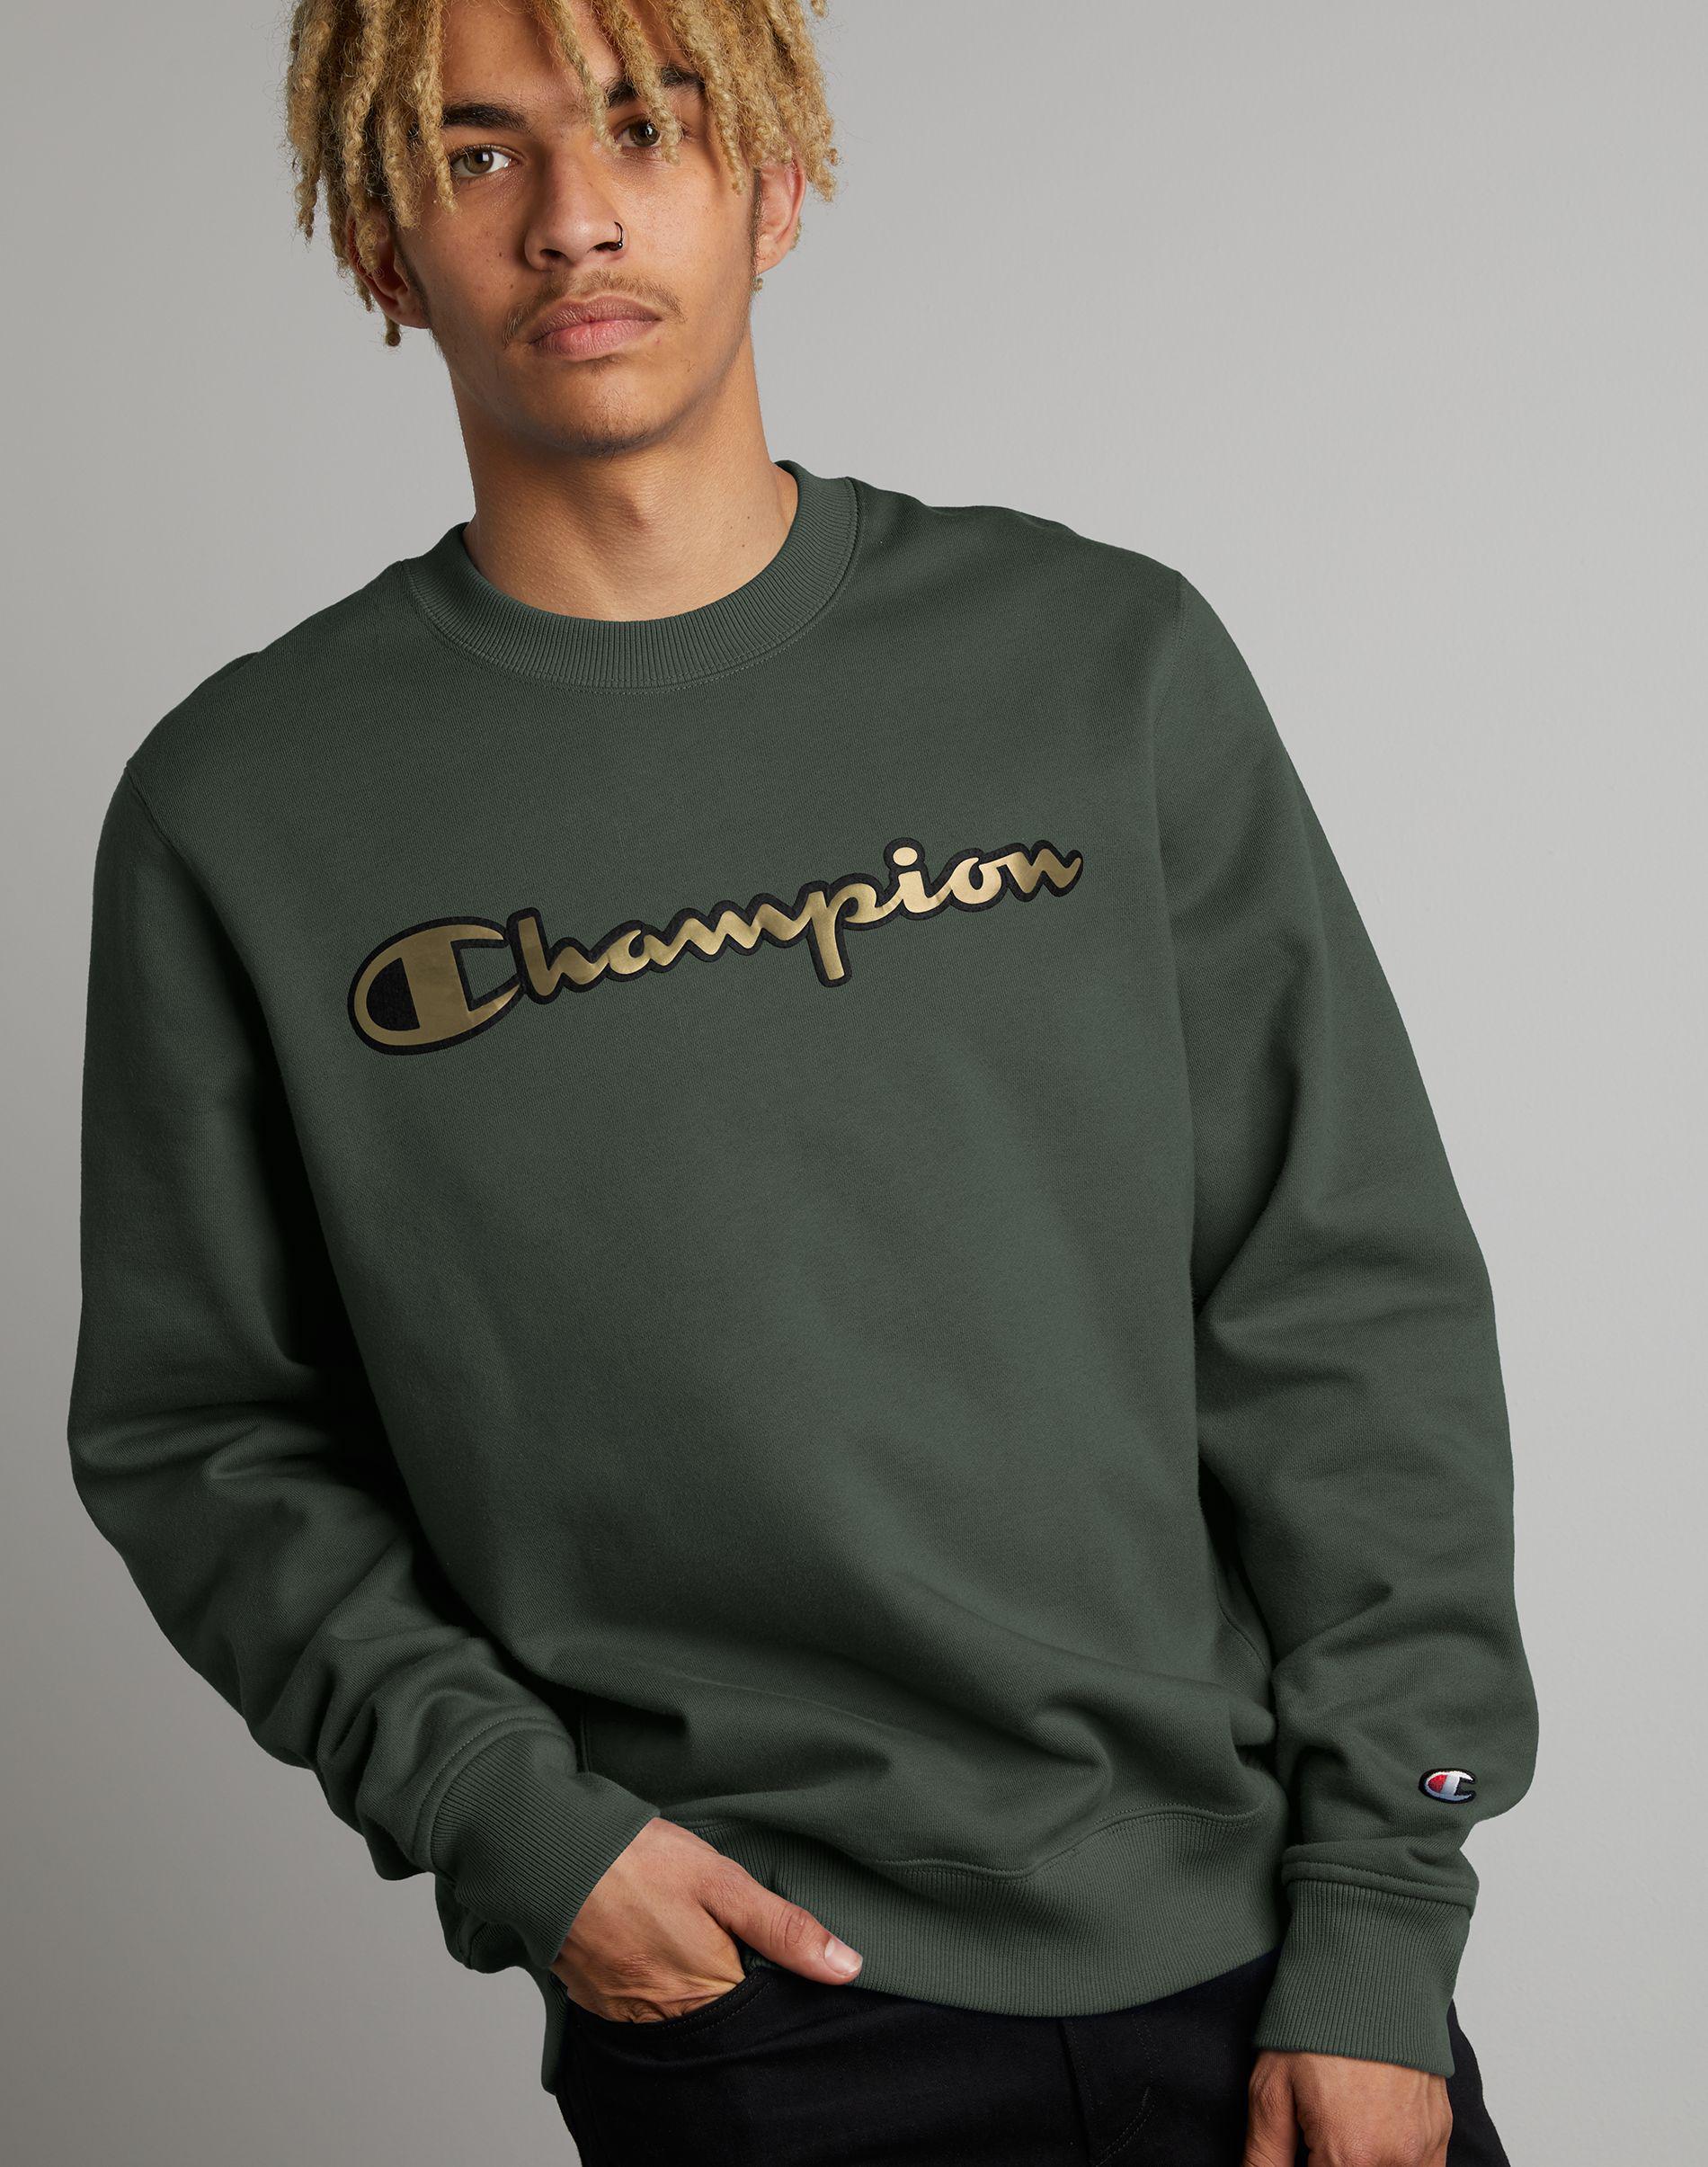 green and gold champion hoodie \u003e Up to 